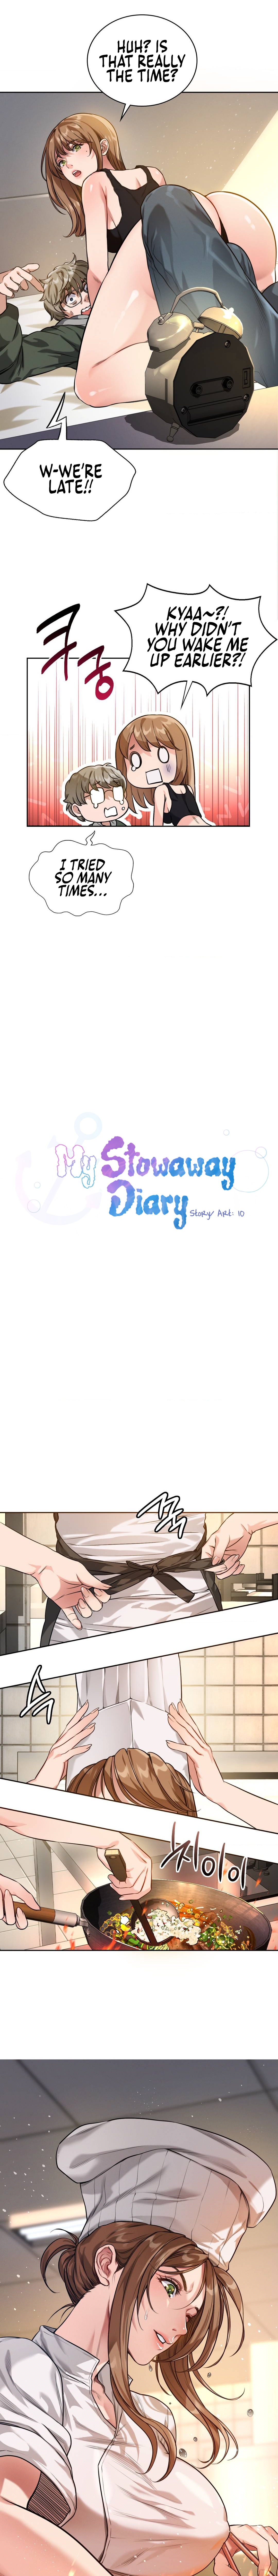 My Stowaway Diary Chapter 1 - Page 9